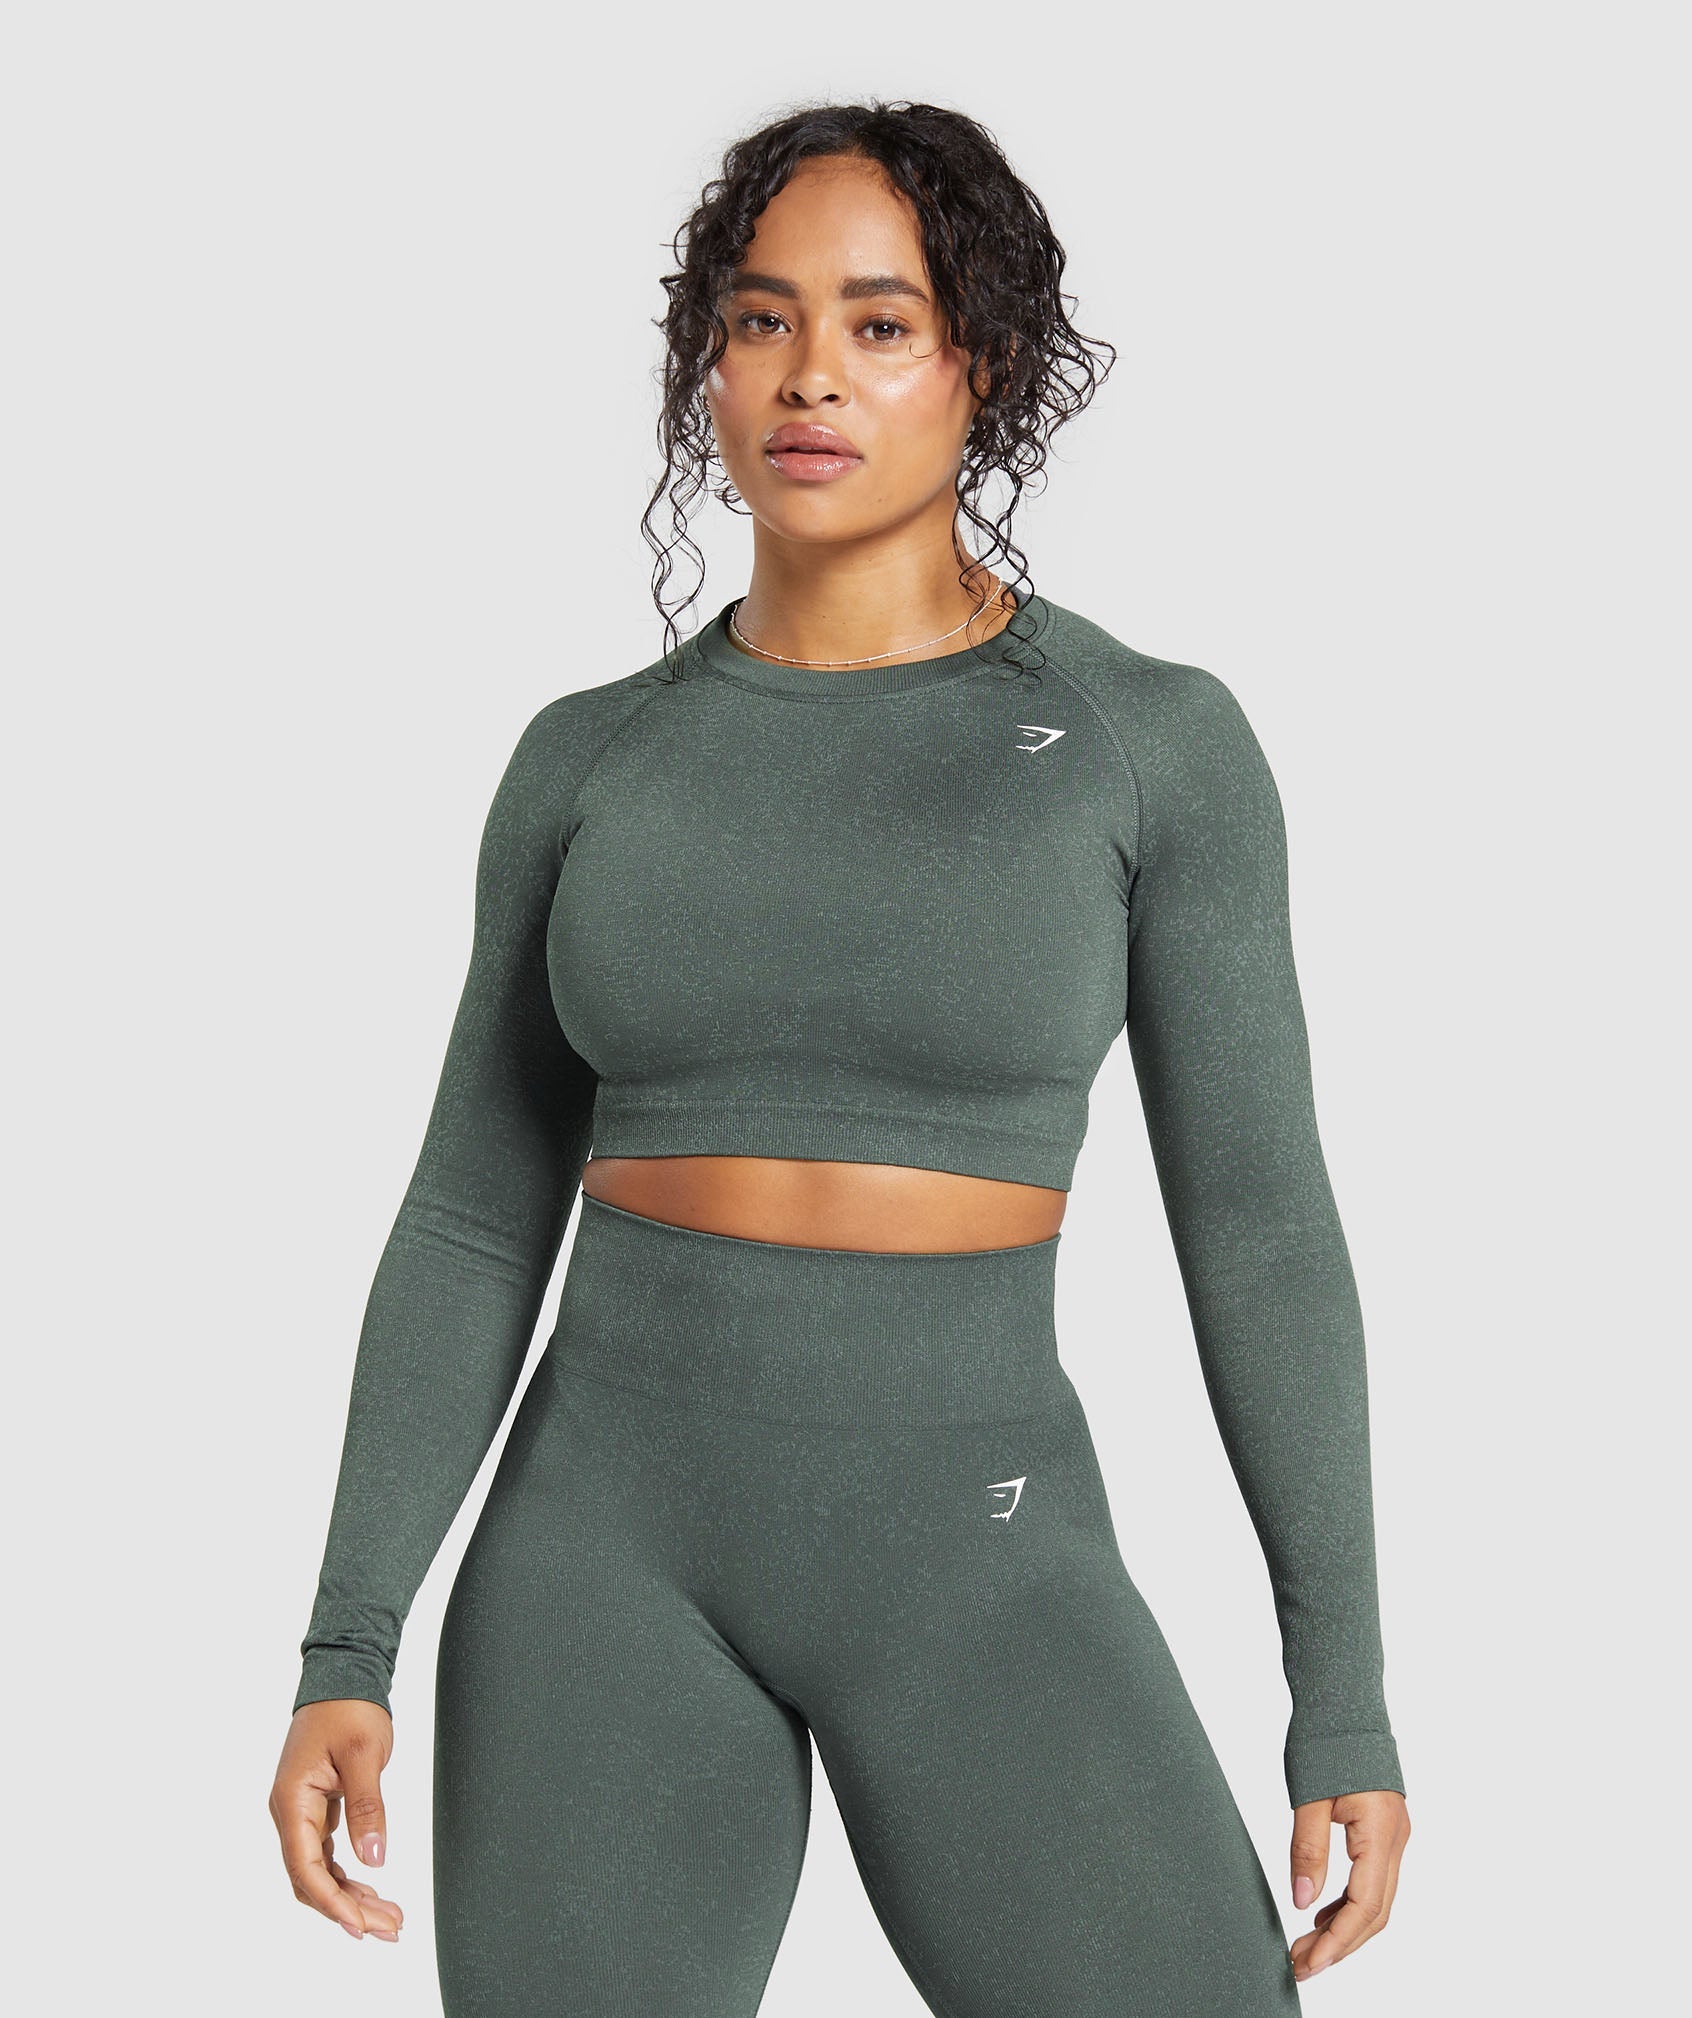 Adapt Fleck Seamless Long Sleeve Crop Top in Slate Teal/Cargo Teal is out of stock